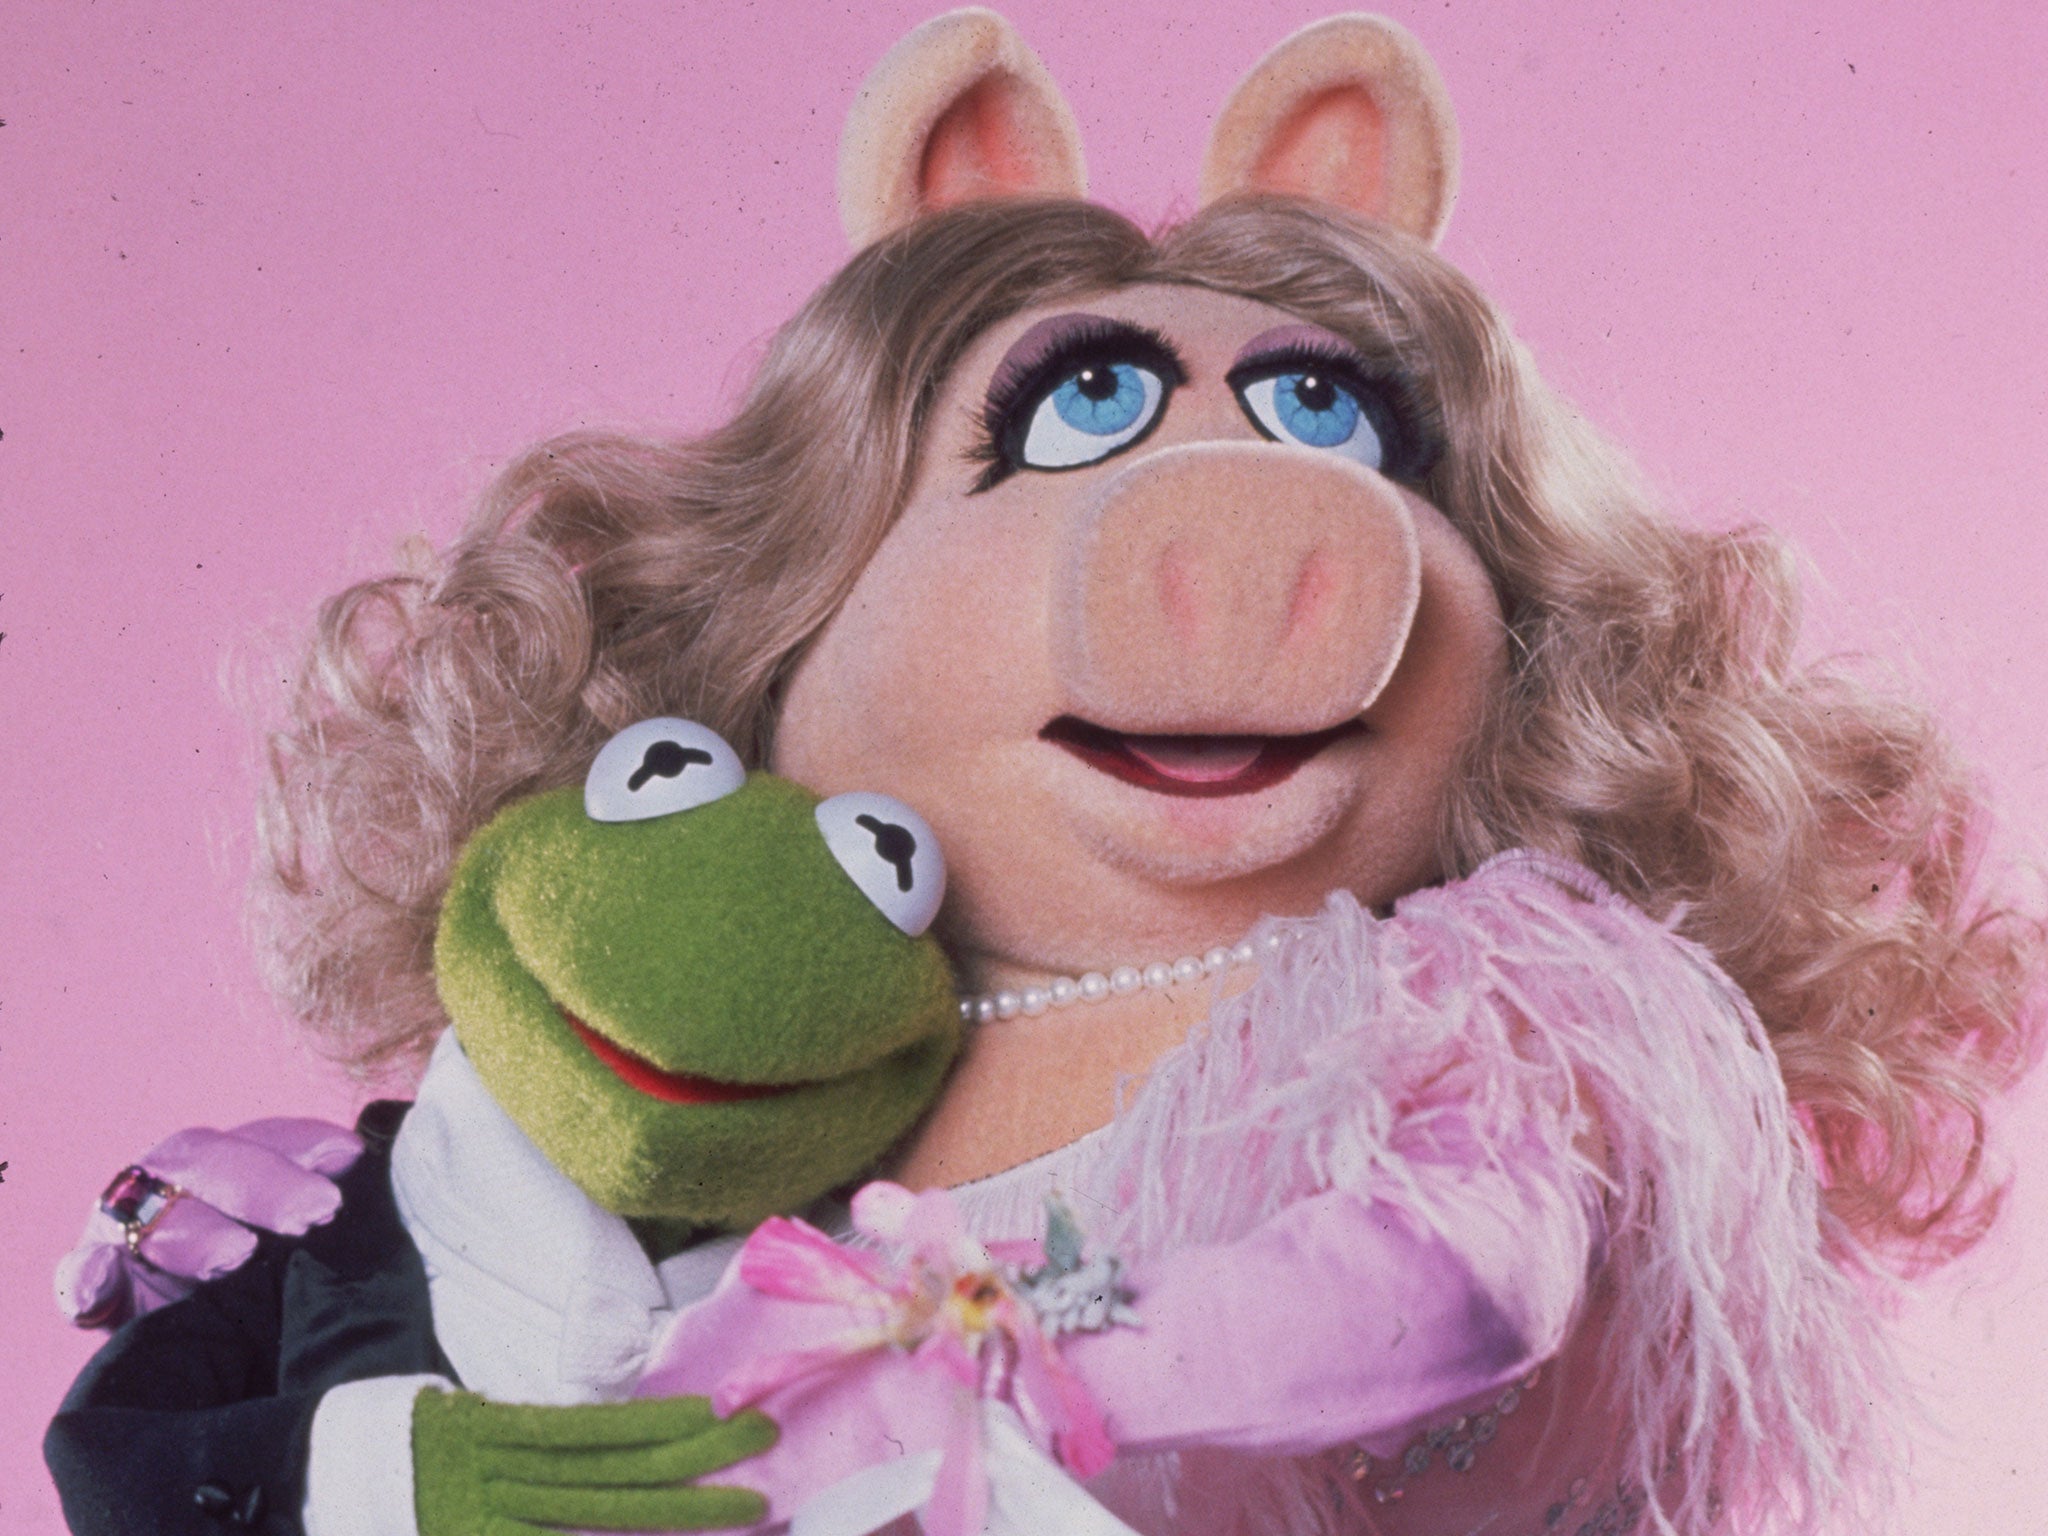 Kermit and Miss Piggy, pictured in 1981 when their relationship was at its strongest